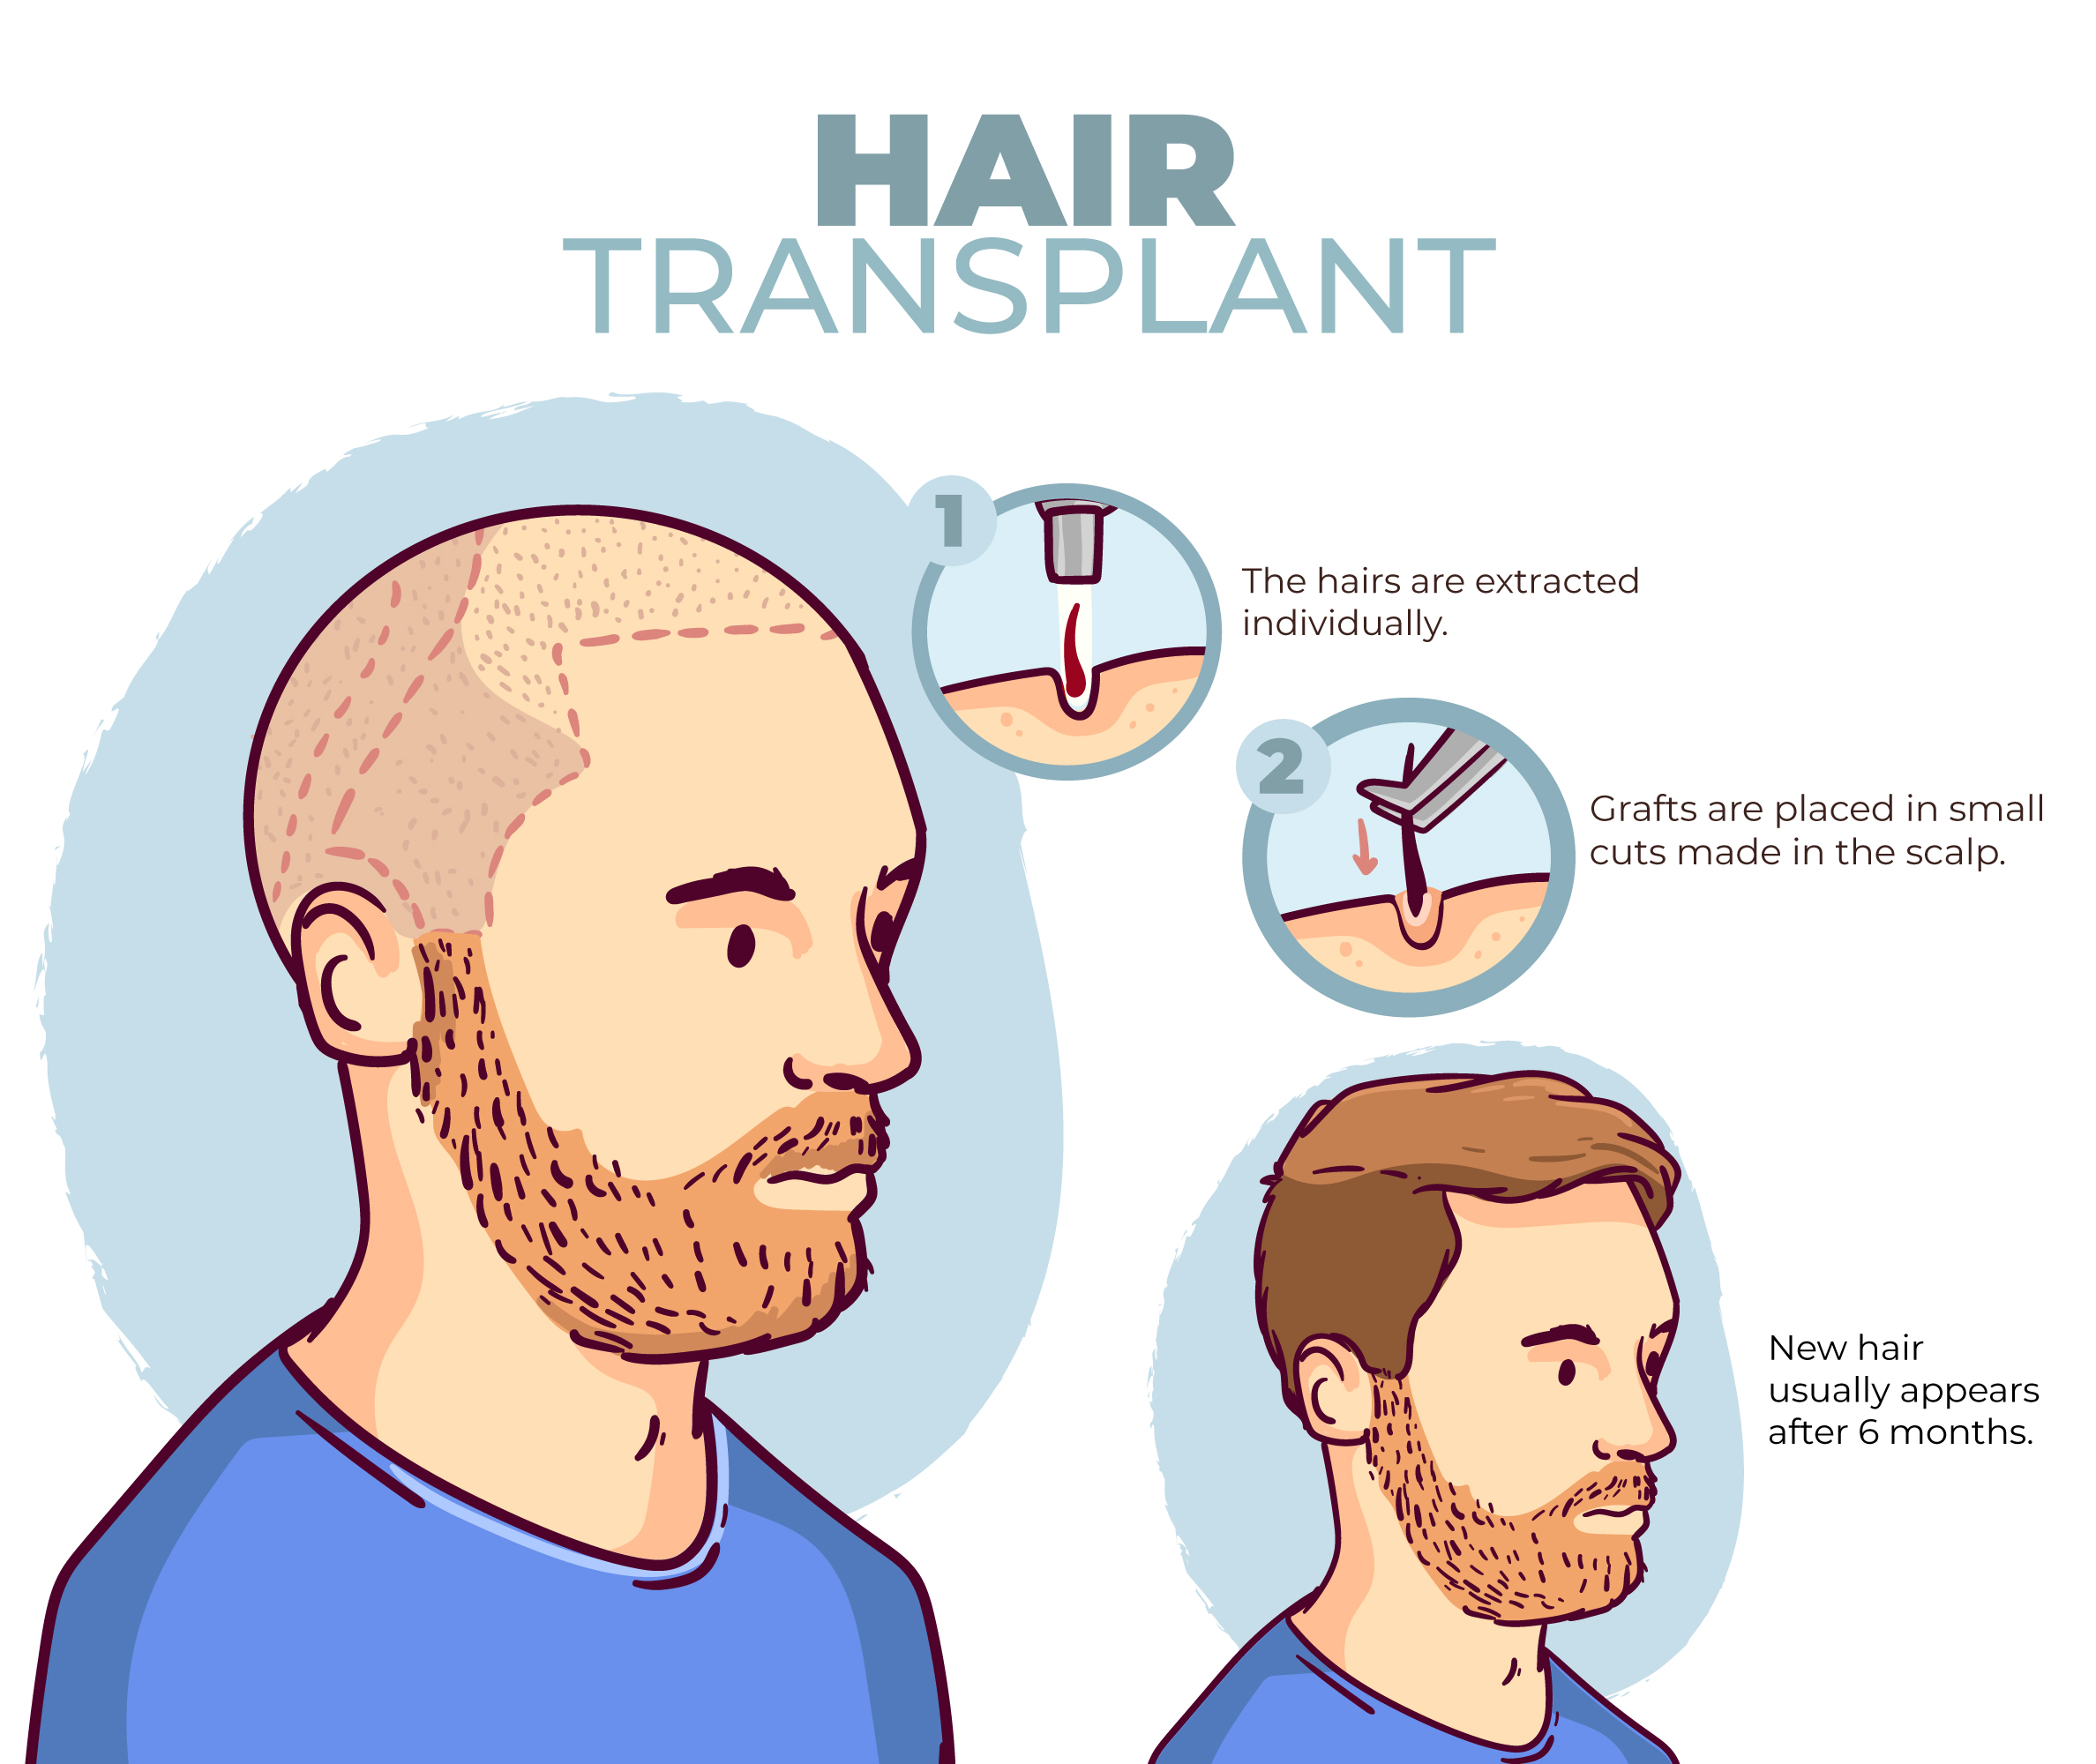 HAIR
TRANSPLANT

The hairs are extracted

individually.
Grafts are placed in small
) cuts made in the scalp.

New hair
usually appears
after 6 months.